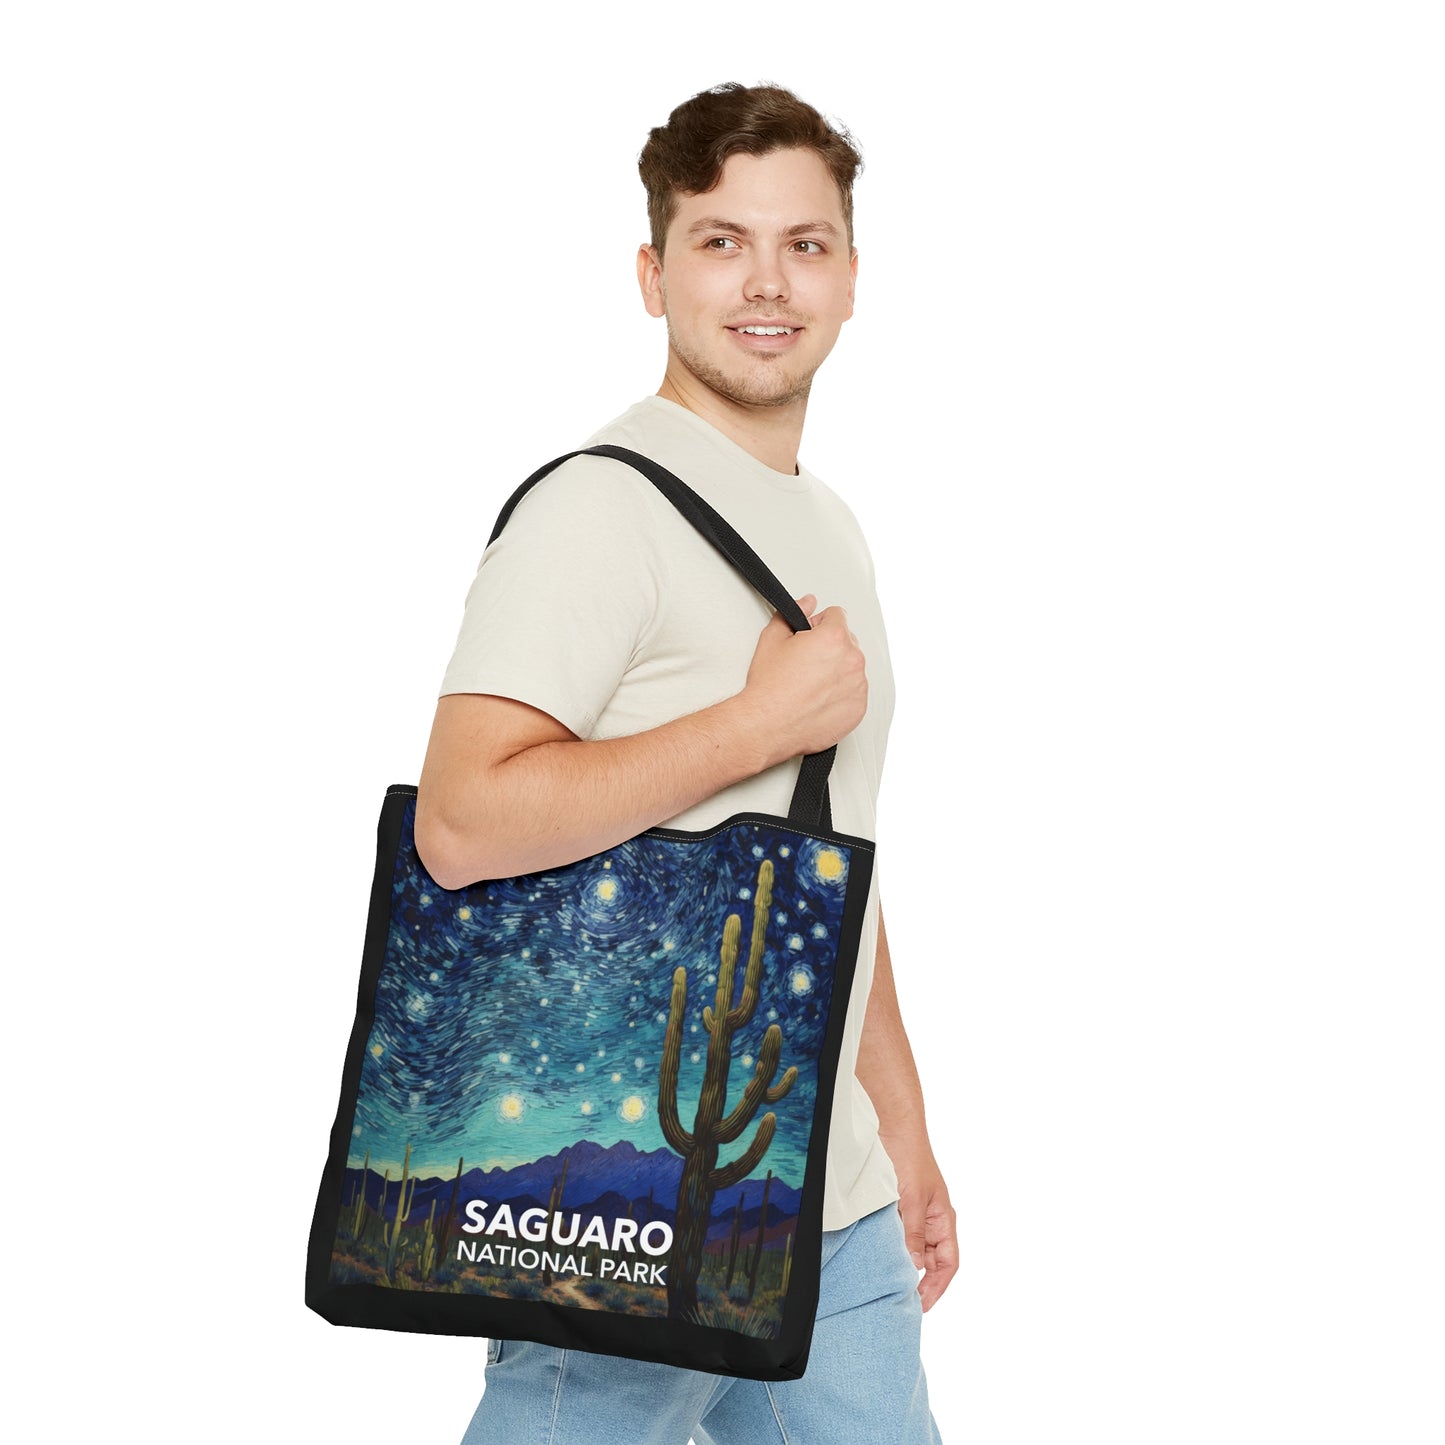 Saguaro National Park Tote Bag - The Starry Night